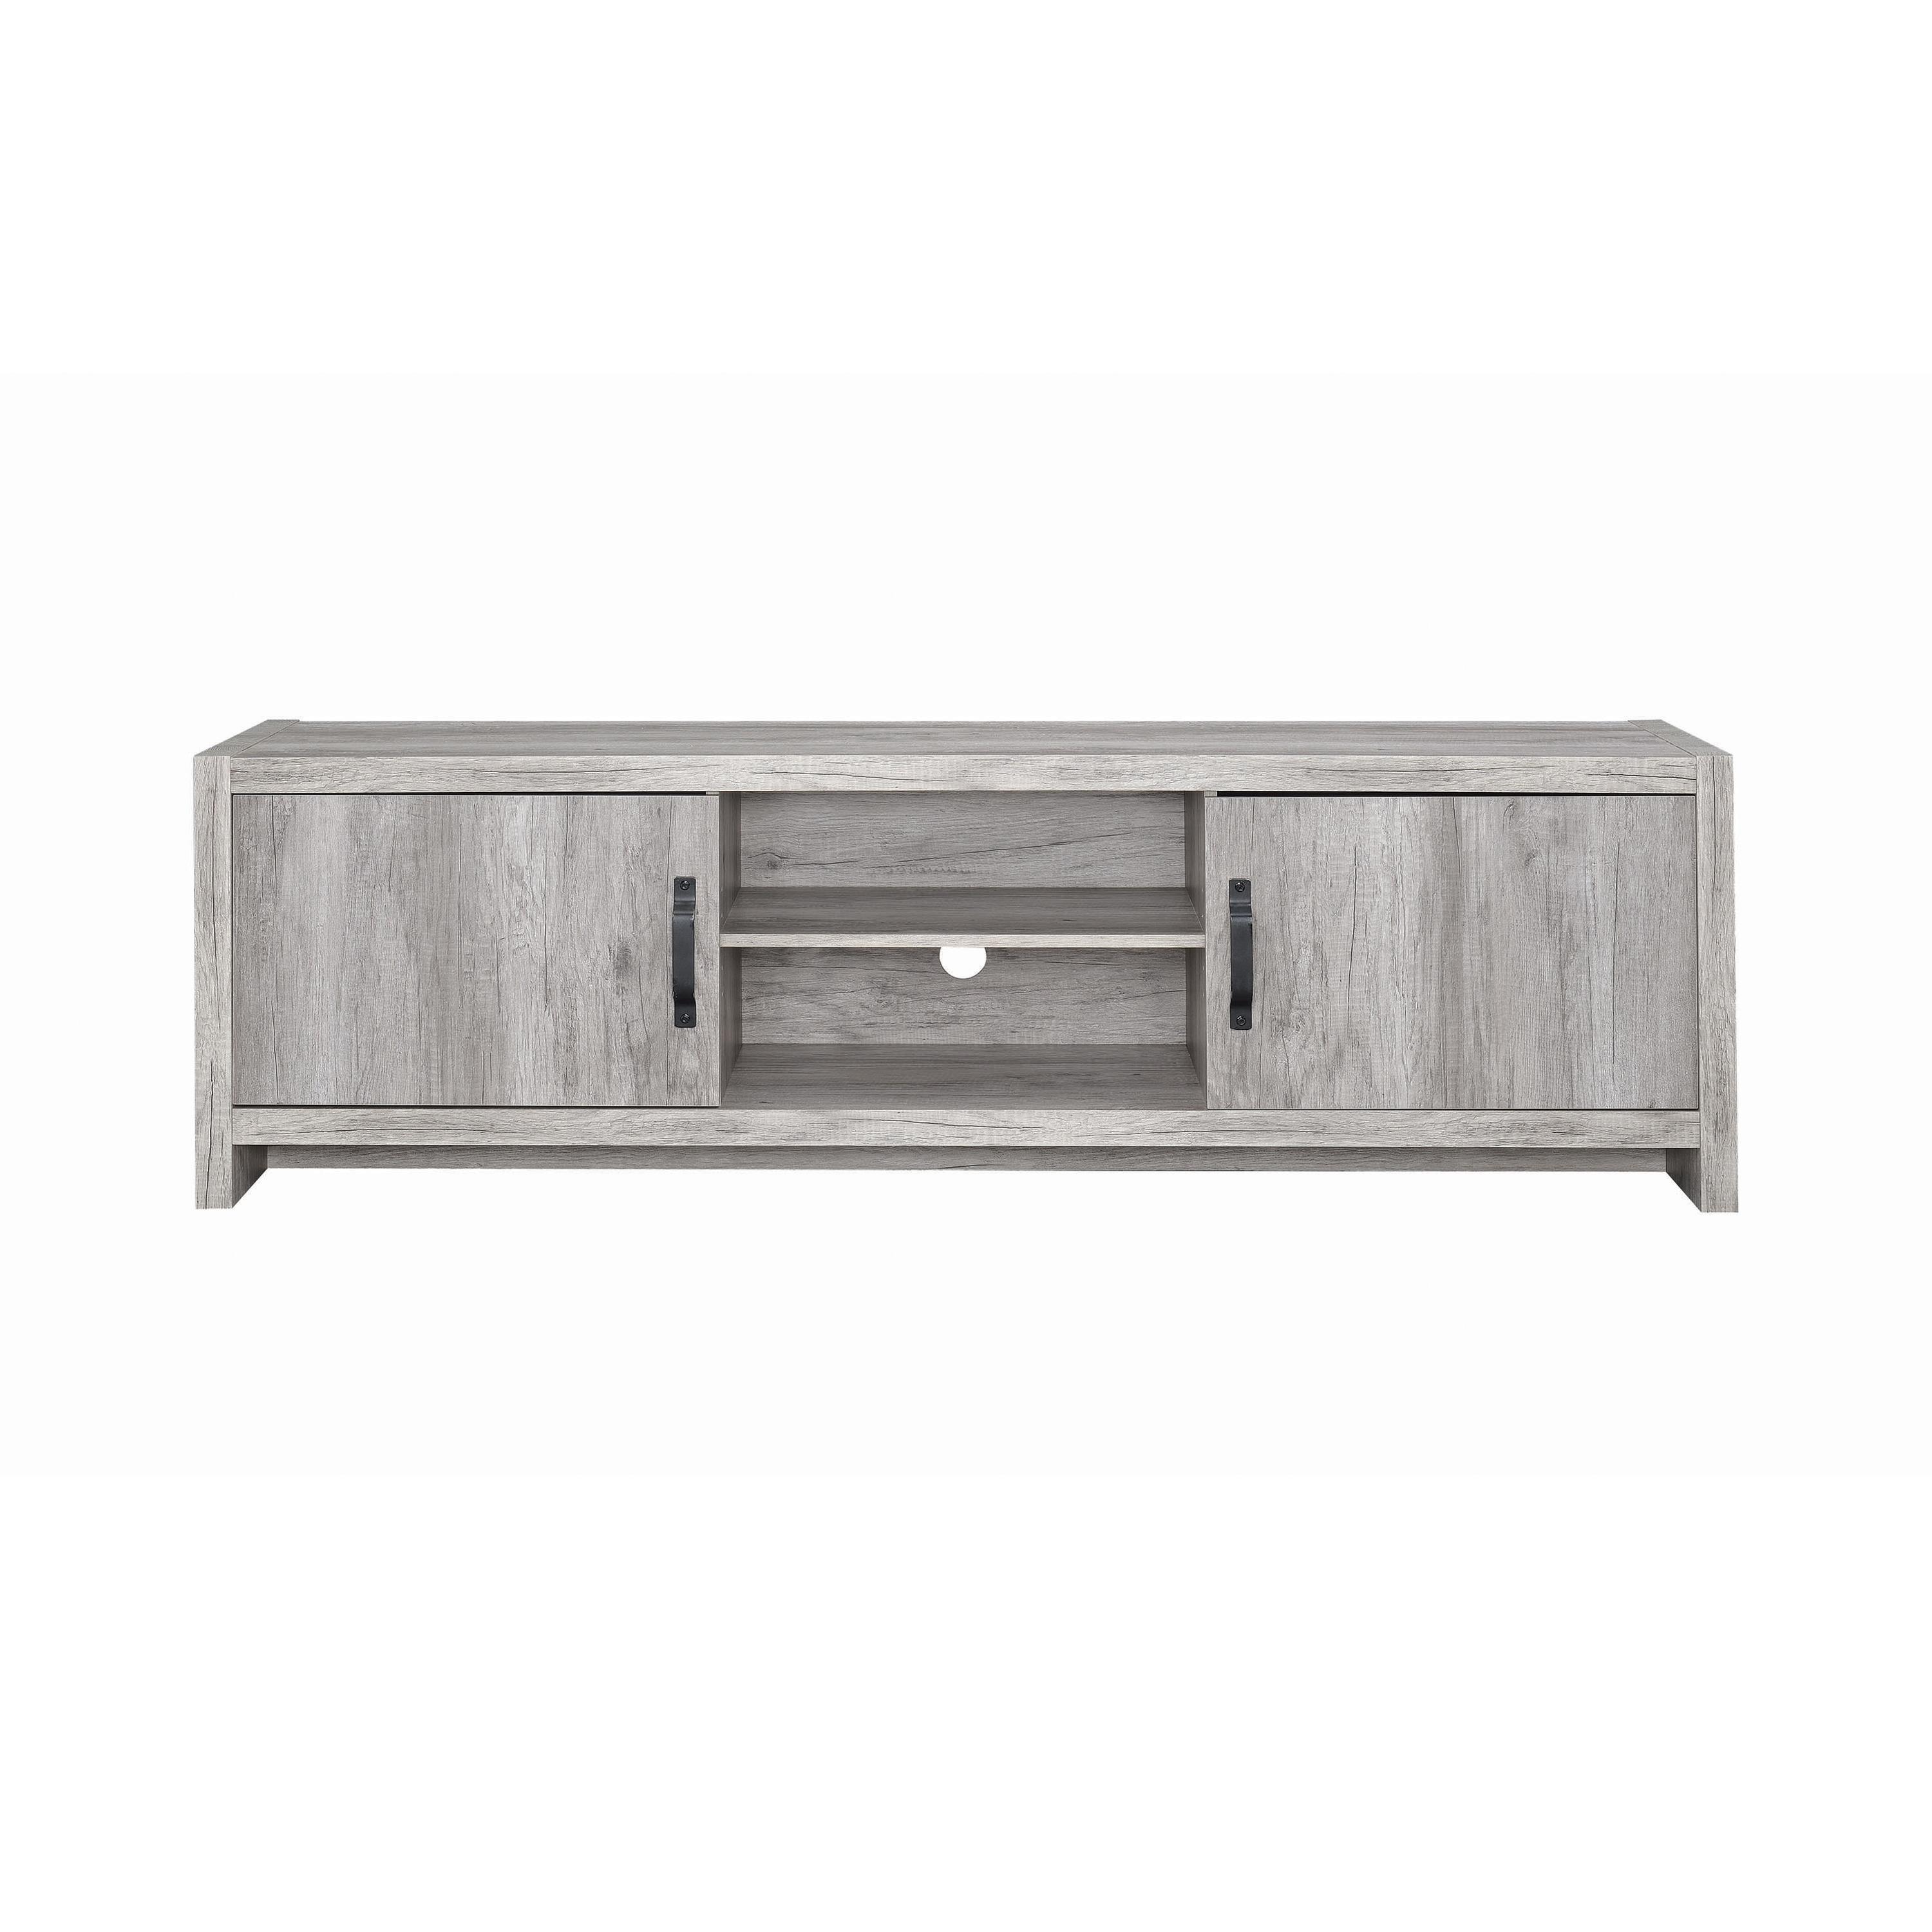 Contemporary Tv Console 701025 701025 in Driftwood 